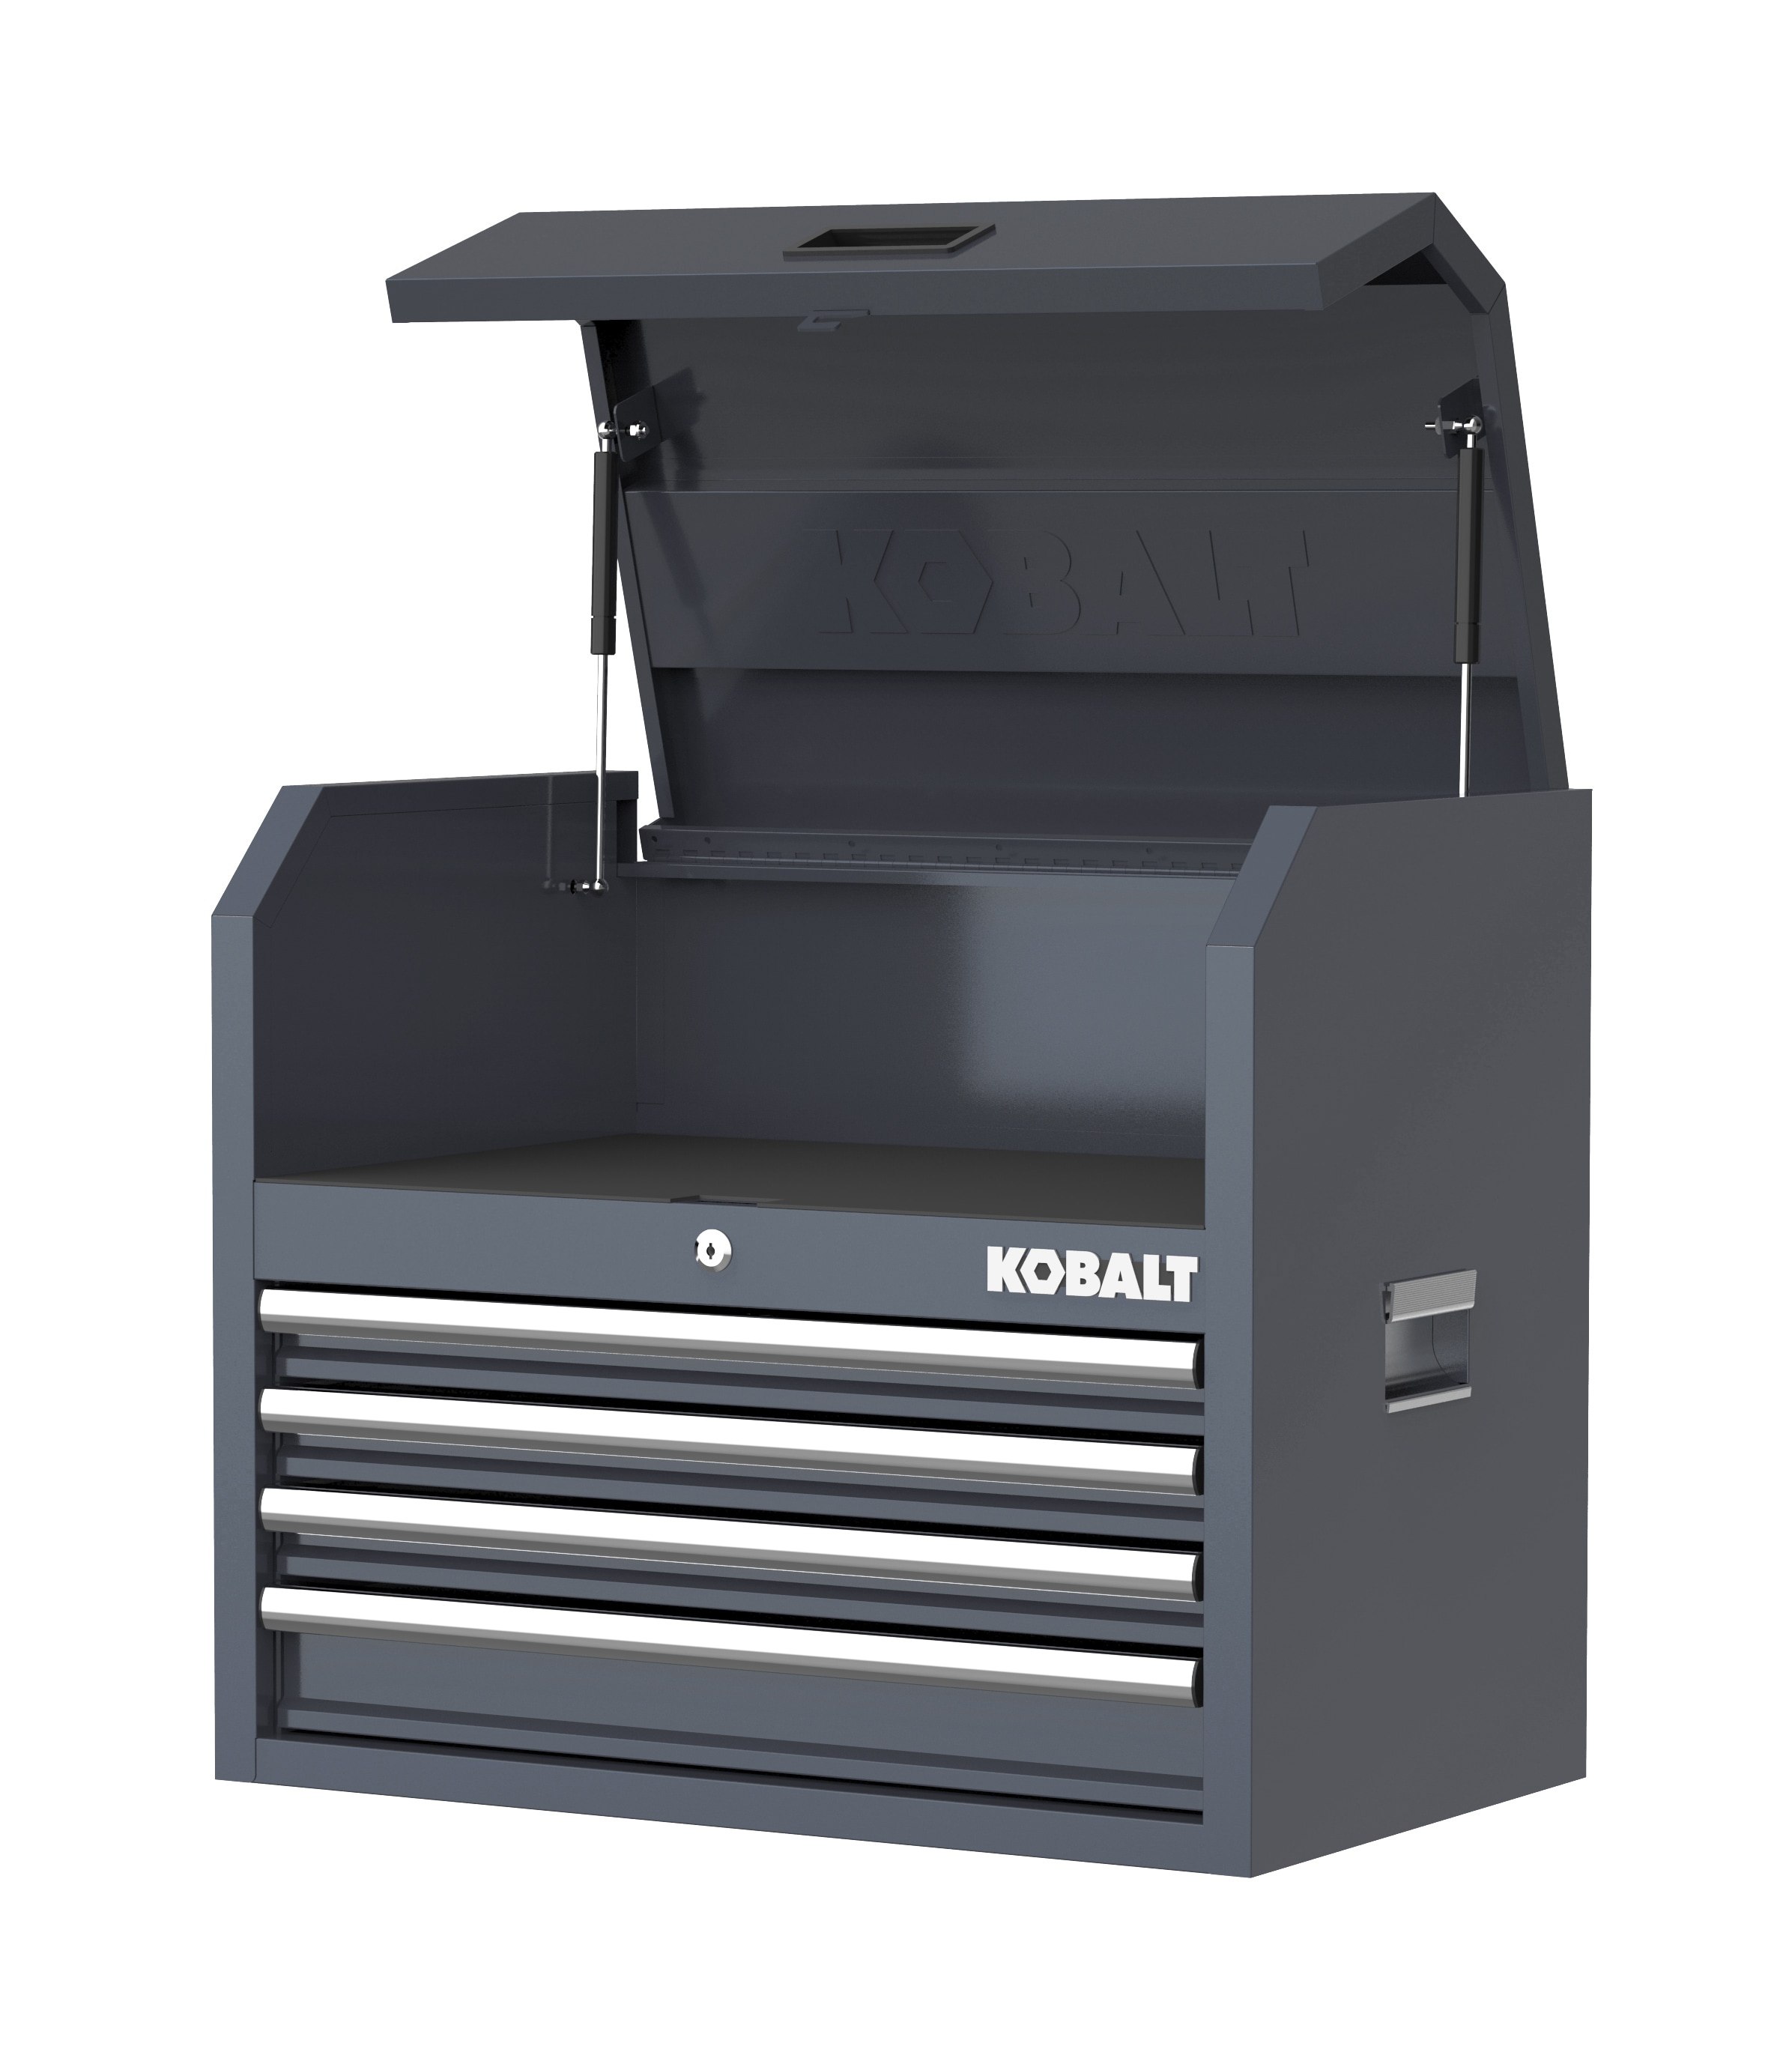 Kobalt 26in W x 22in H 4Drawer Steel Tool Chest (Gray) in the Top